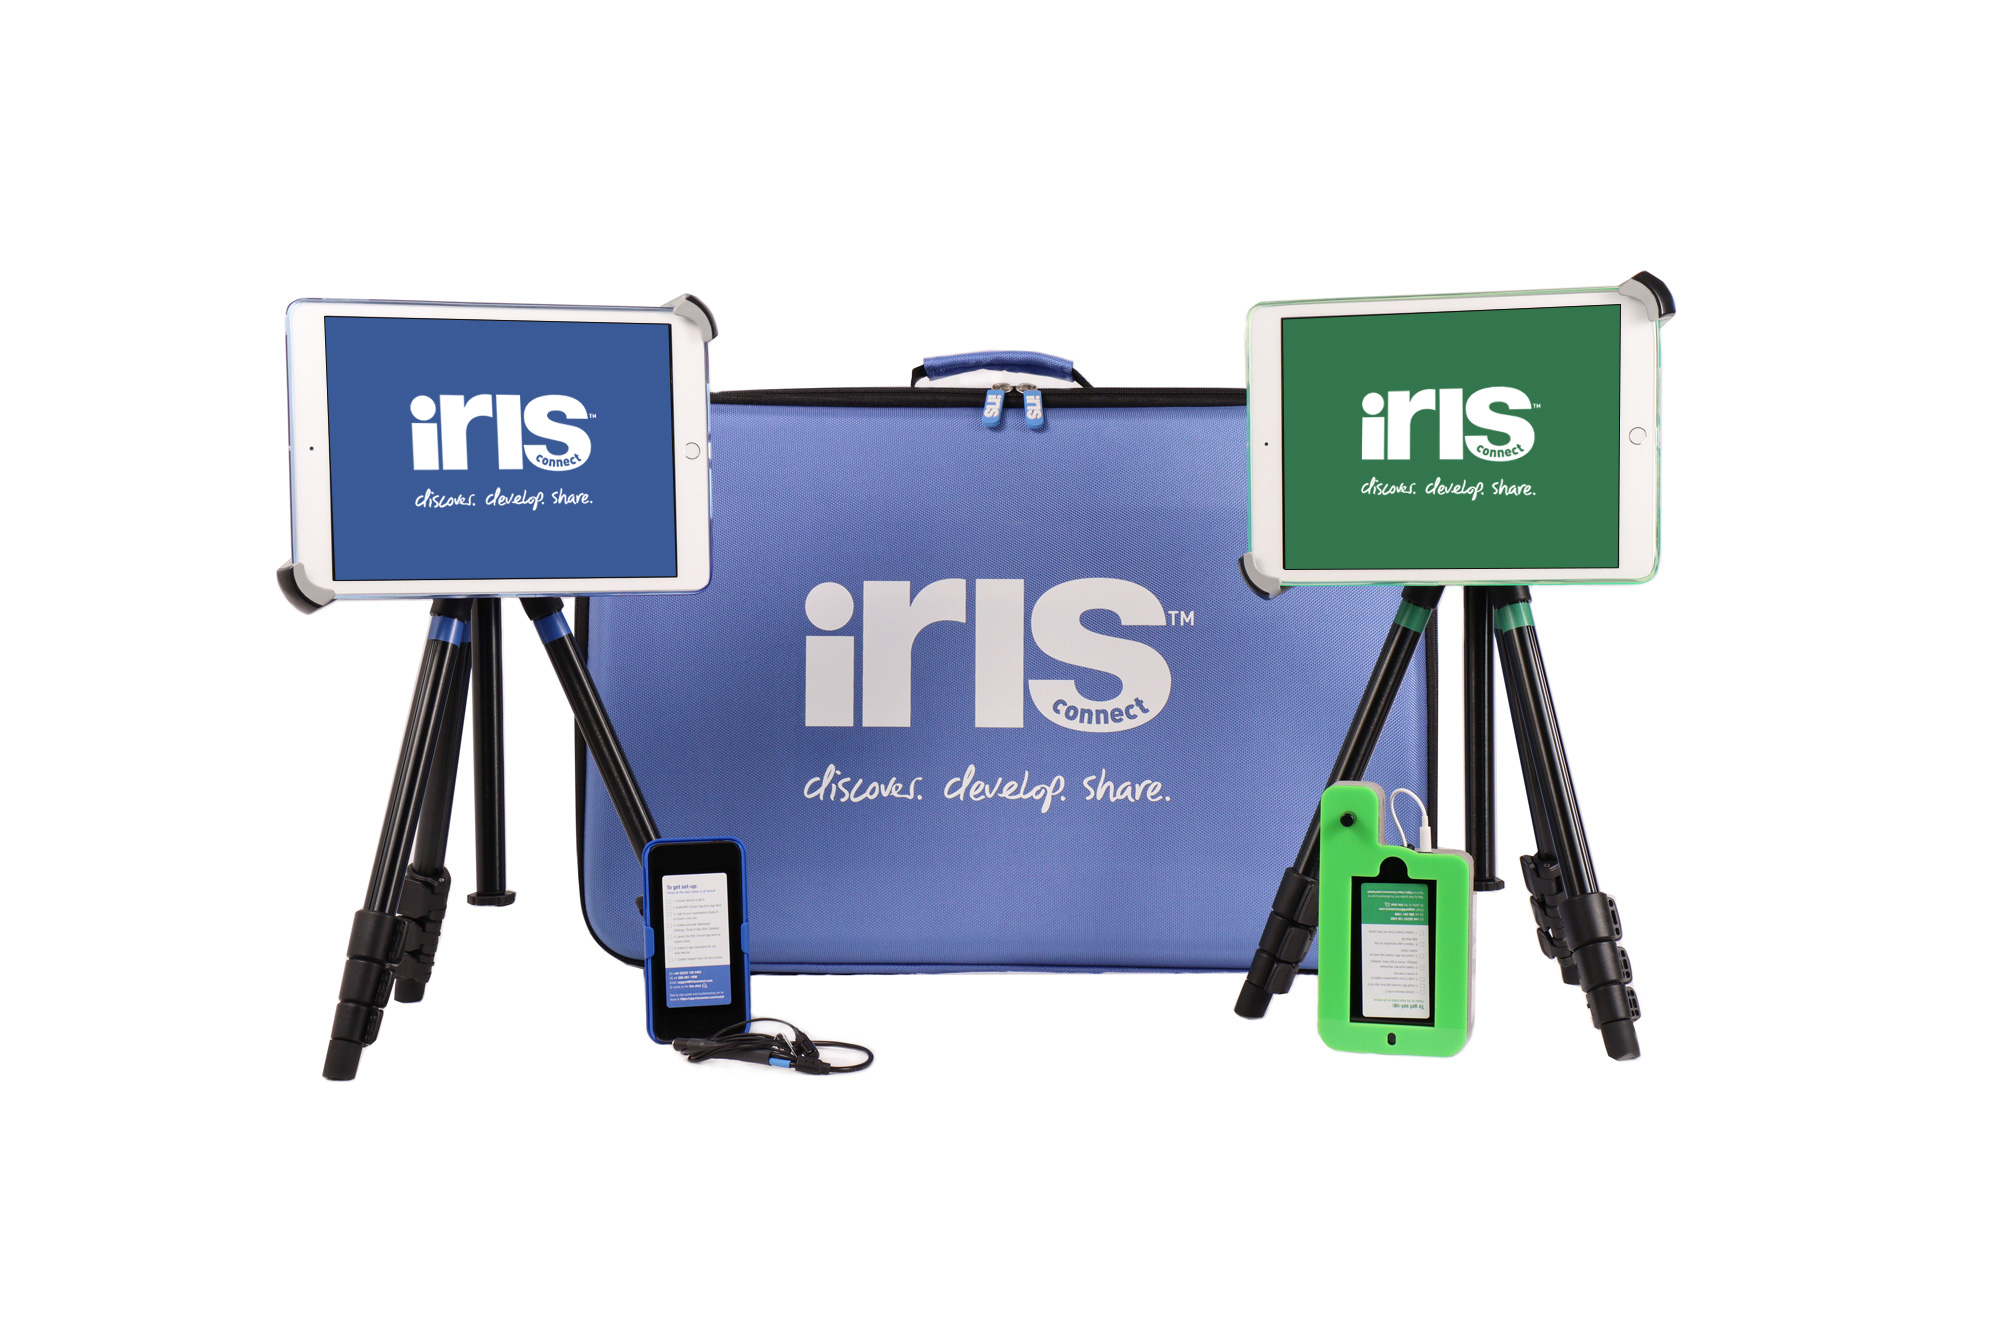 Shows two iPads held on tripods, a blue iPod as a microphone, and a green foam cased iPod. Behind this is a blue IRIS Connect branded carry case.